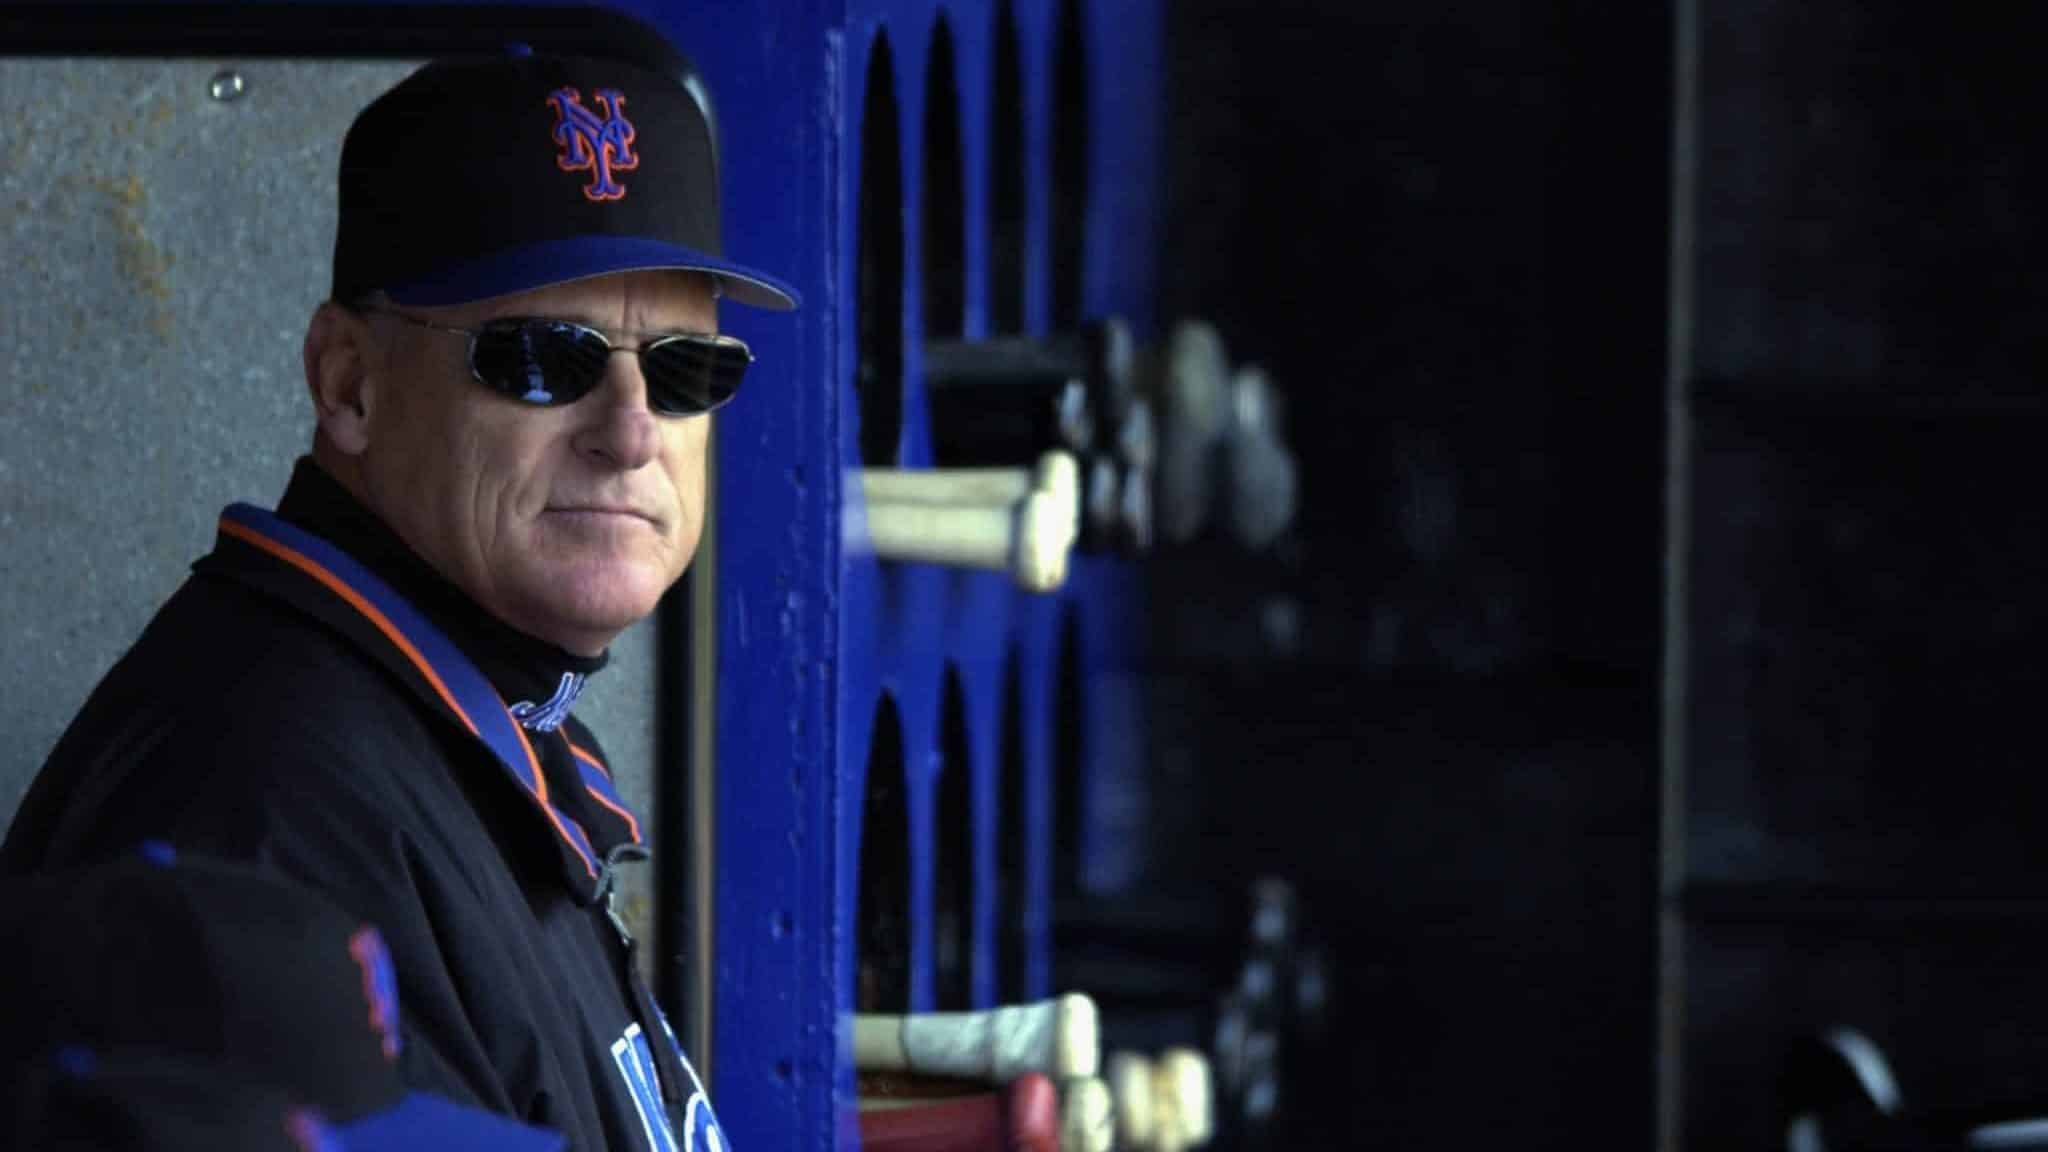 FLUSHING, NY - APRIL 6: Manager Art Howe of the New York Mets looks out from the dugout during the game against the Monteal Expos at Shea Stadium on April 6, 2003 in Flushing, New York. The Expos won 8-5.